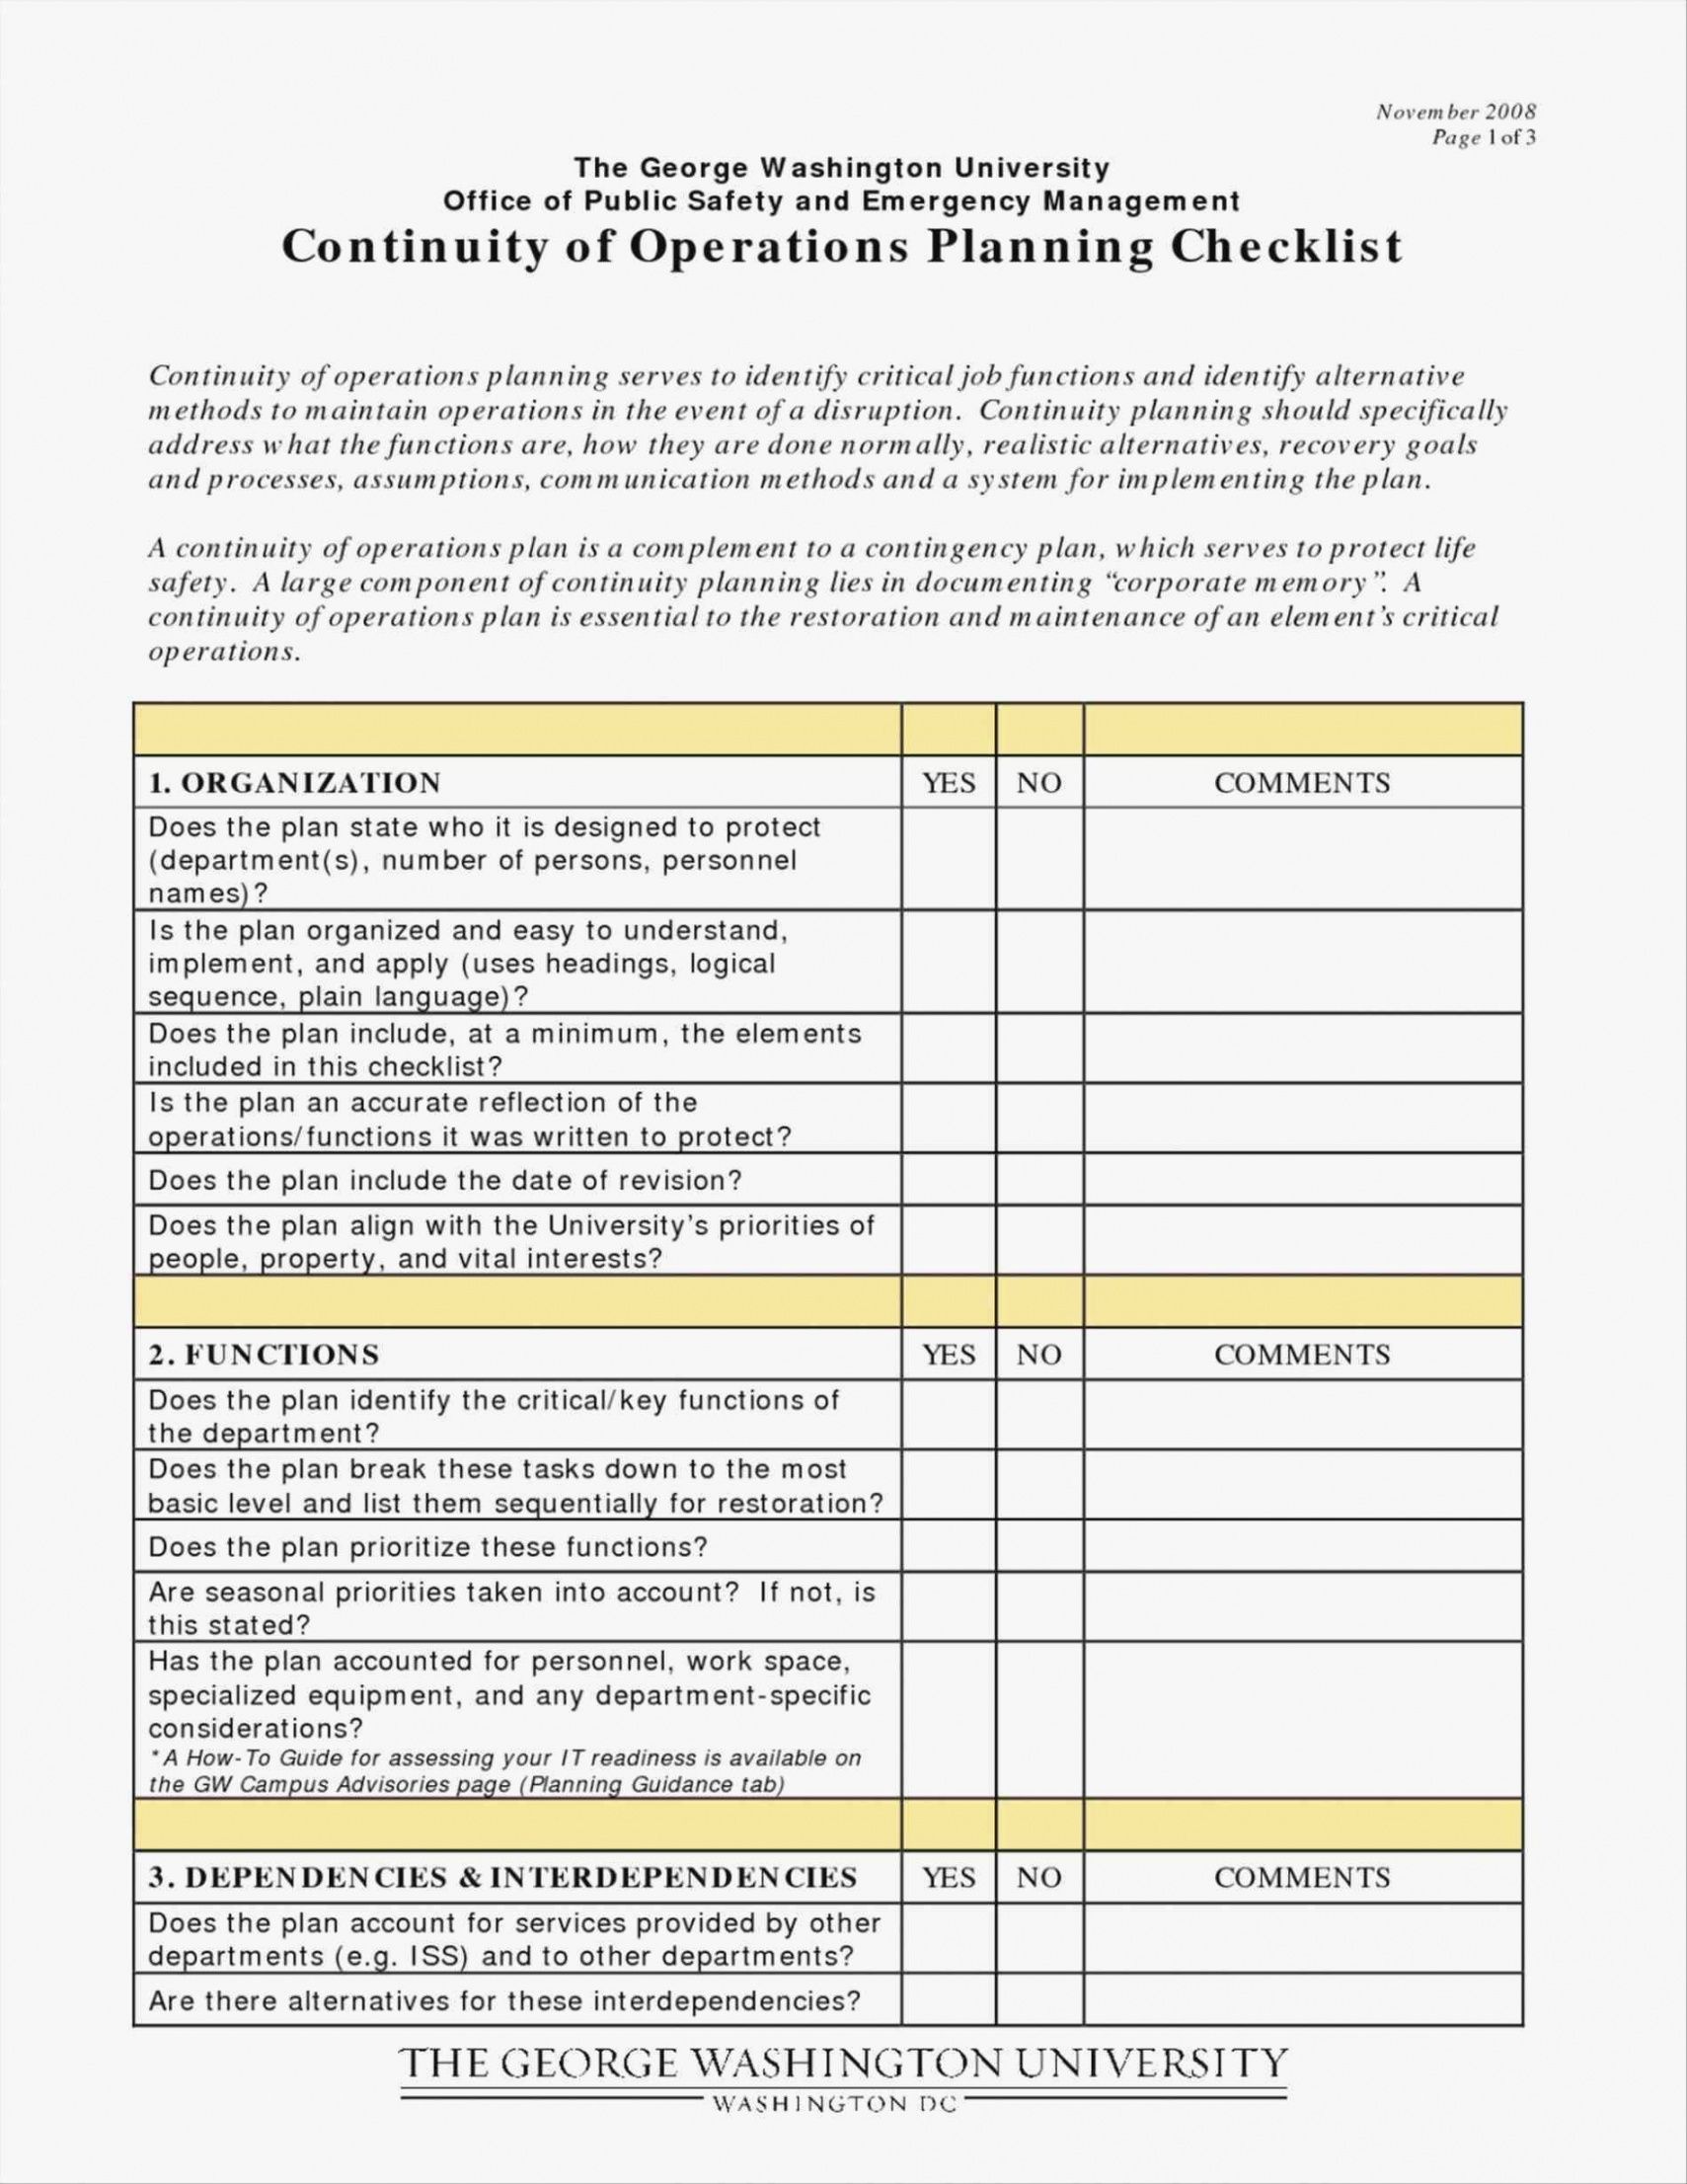 Warehouse Inspection Checklist Template GA08003 First Aid Kit